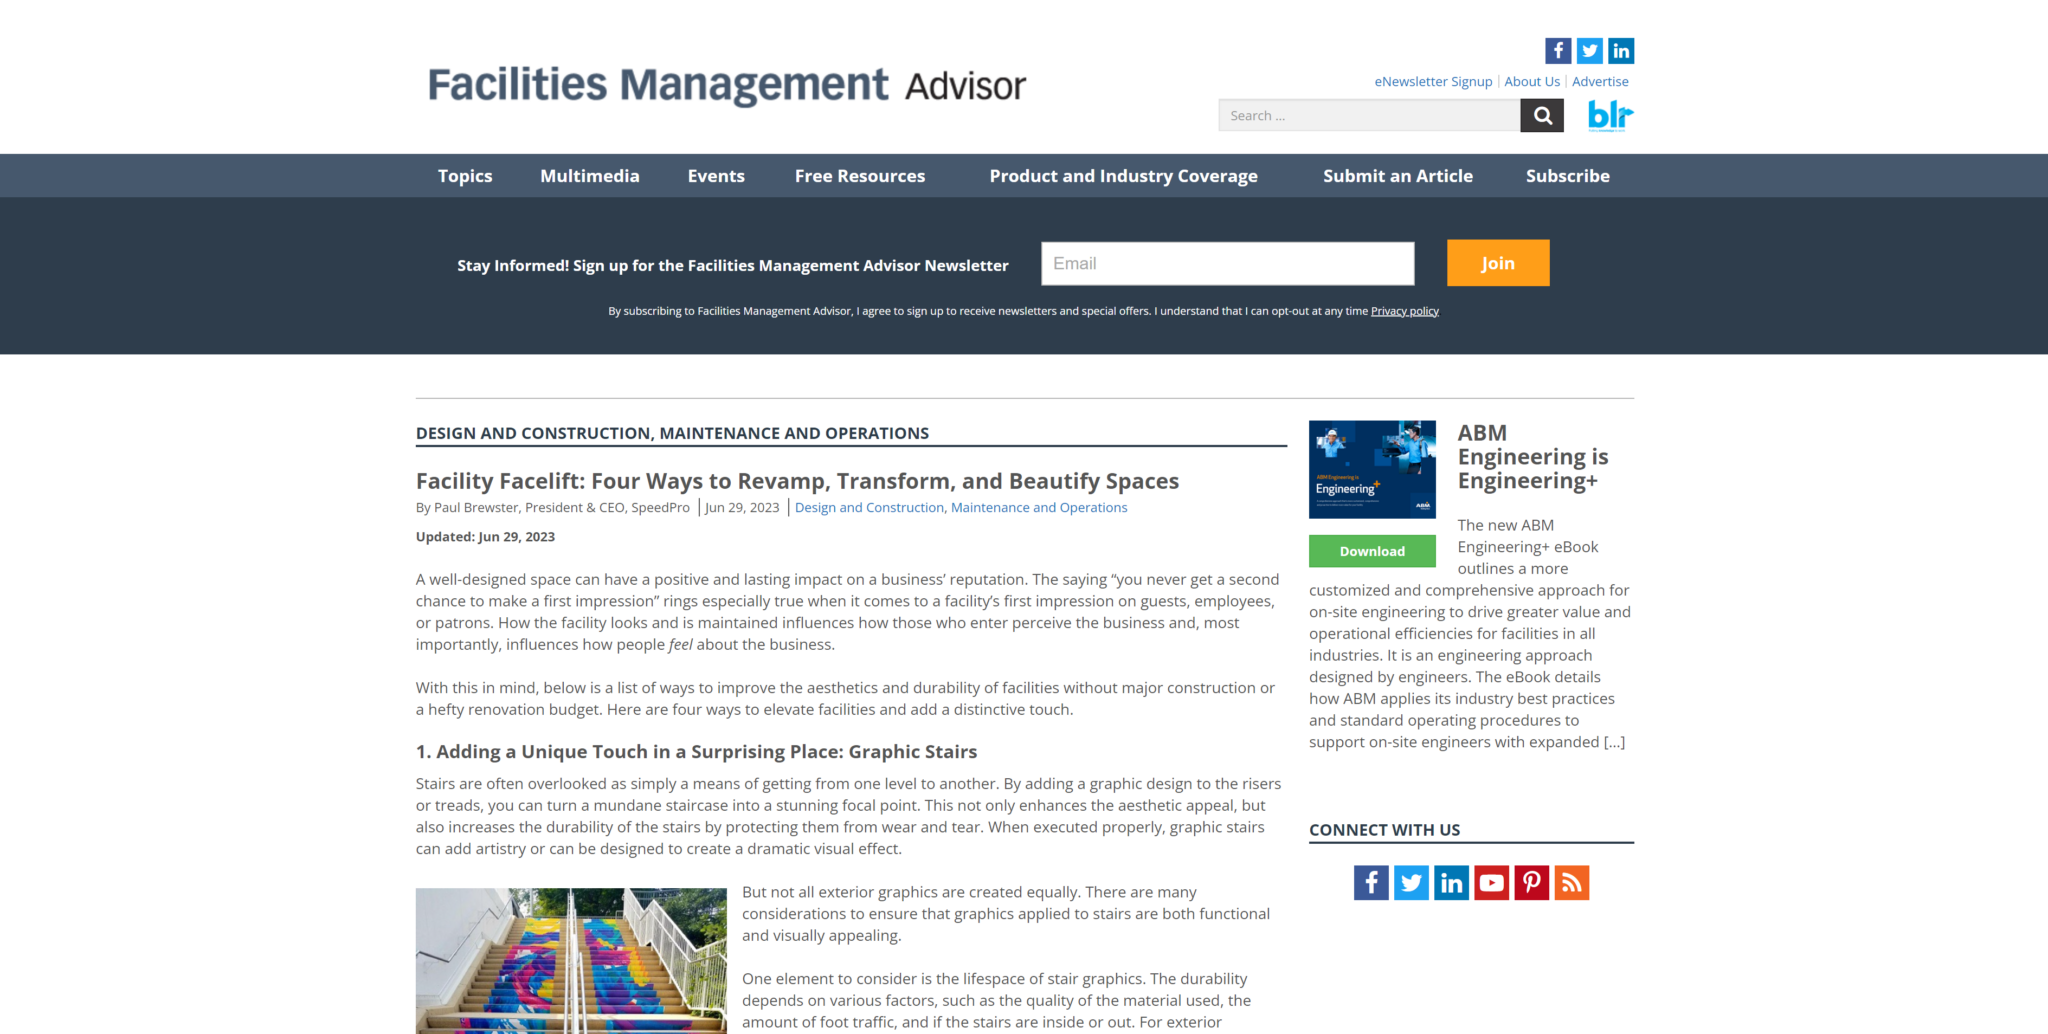 SpeedPro's CEO Paul Brewster interviewed with Facilities Management Advisor in "Facilities Facelift" article